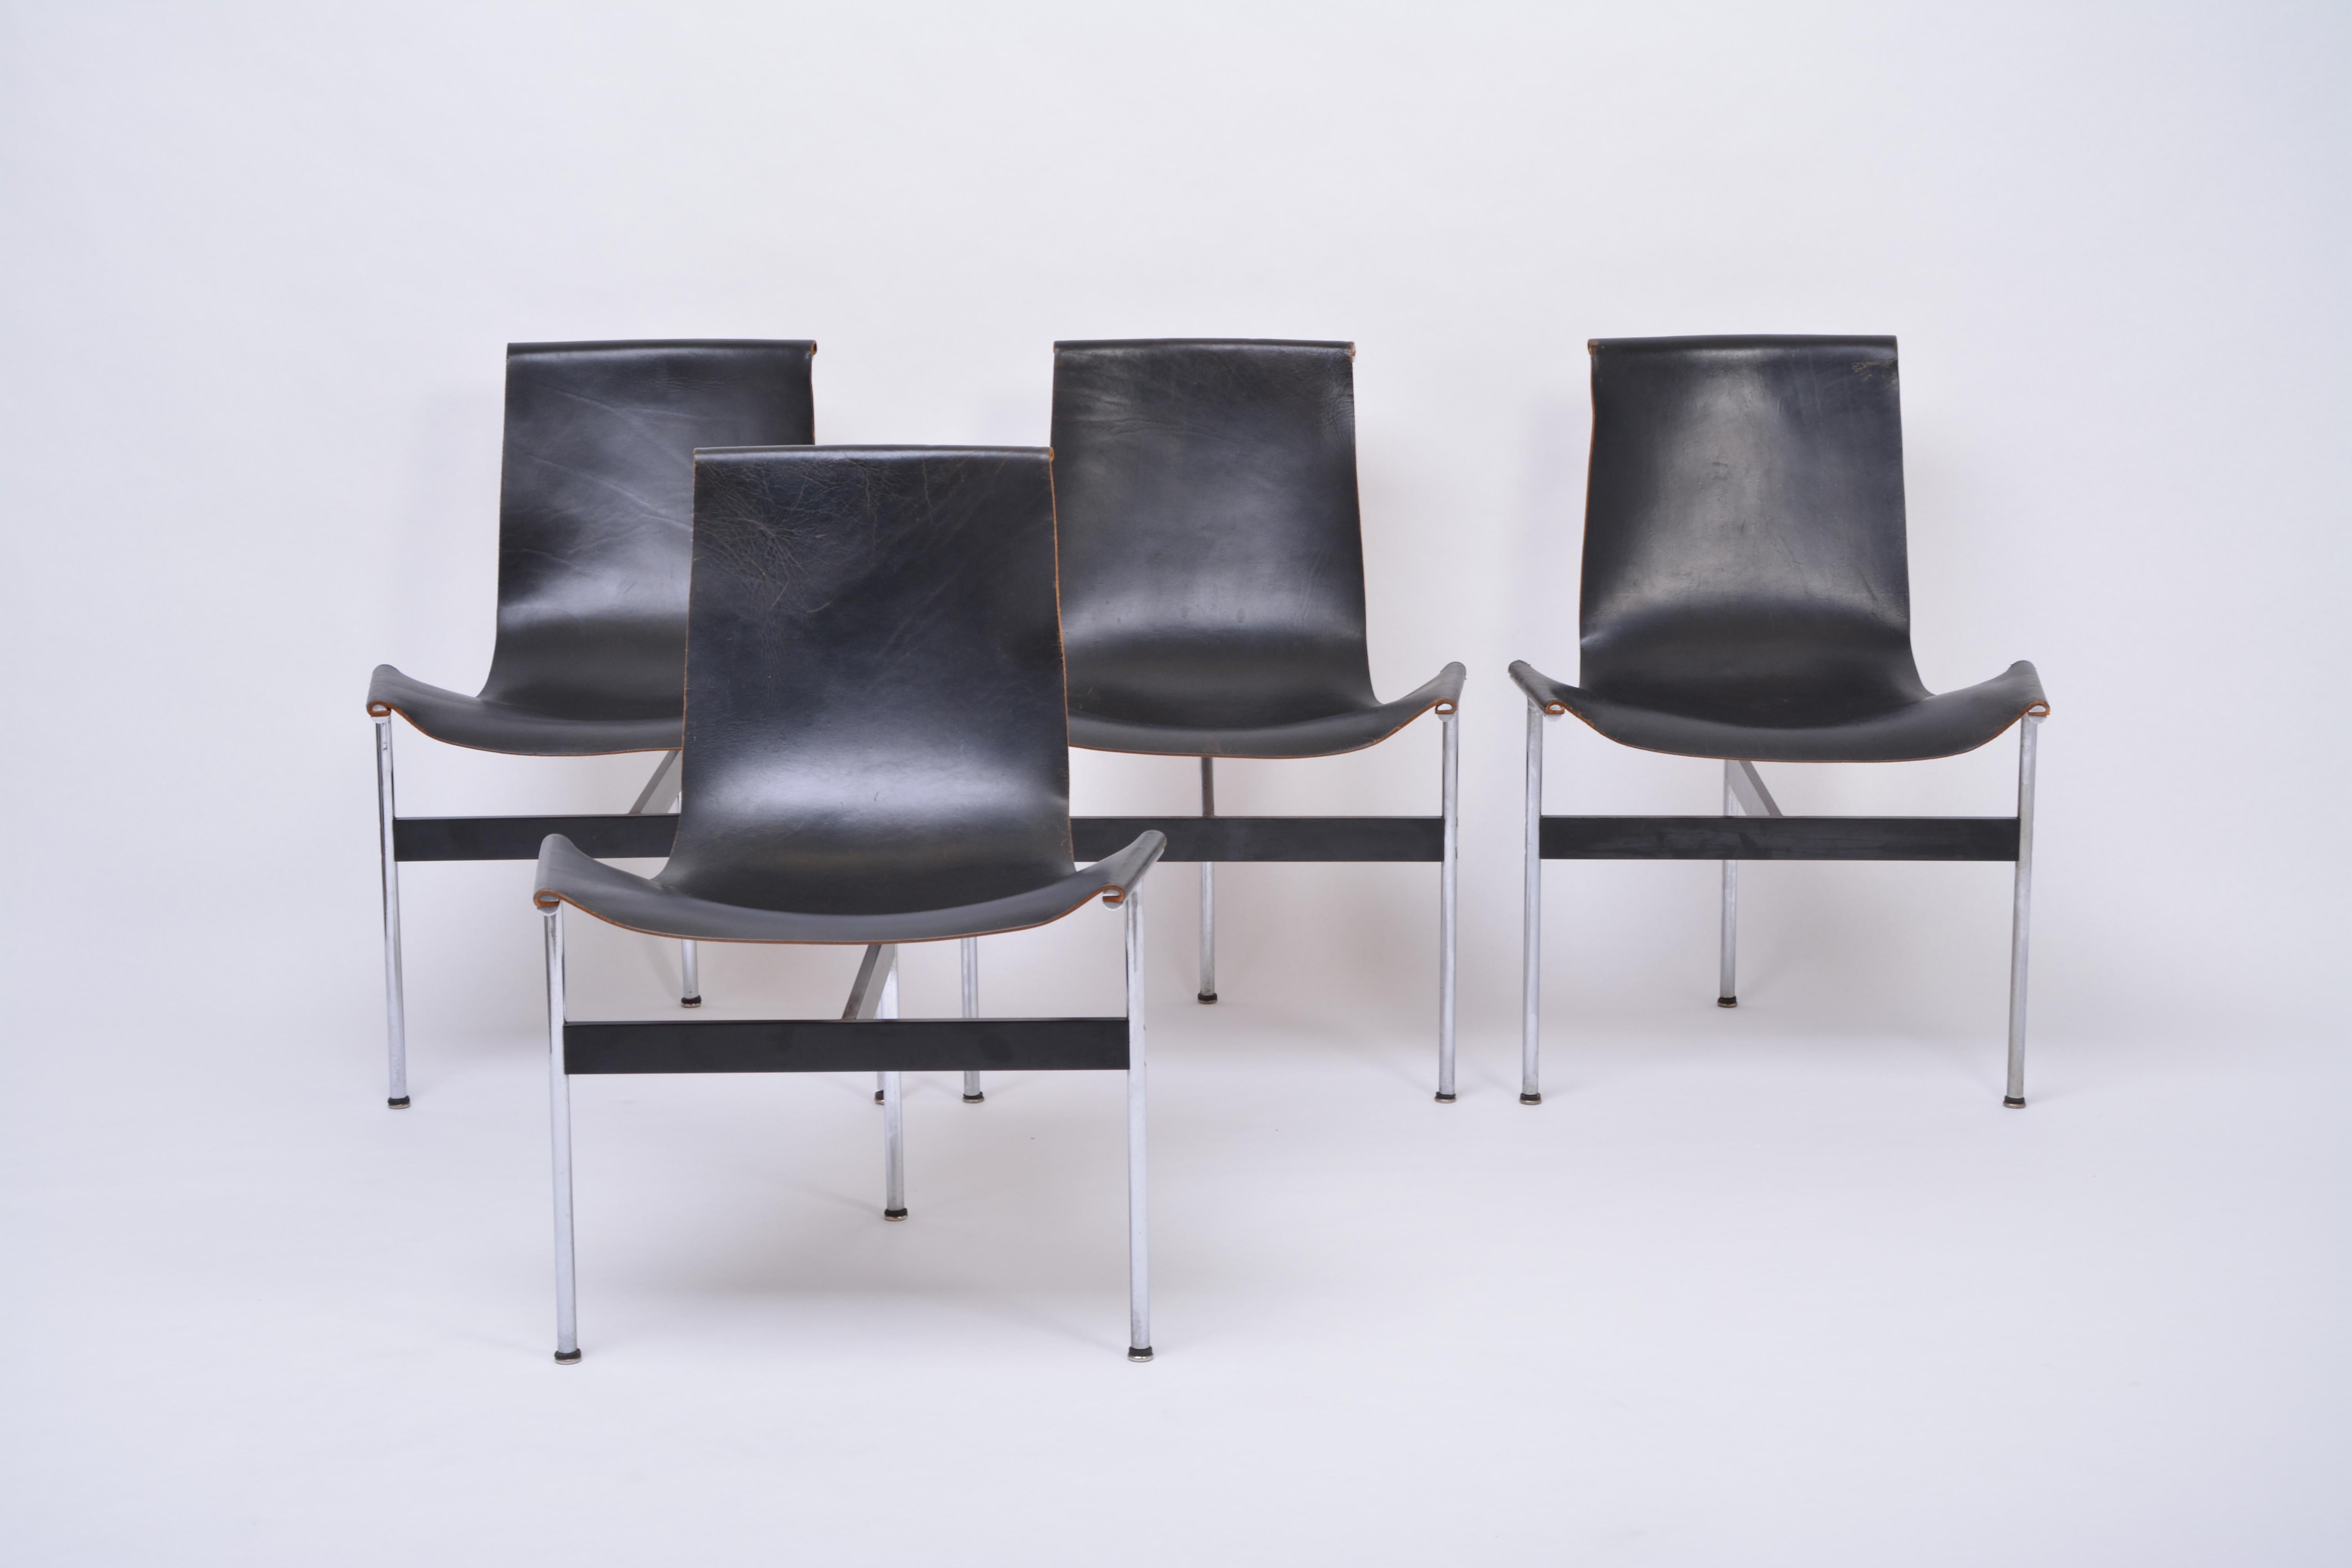 American Set of Four Midcentury T-Chairs in black Leather by Katavolos, Littell and Kelly